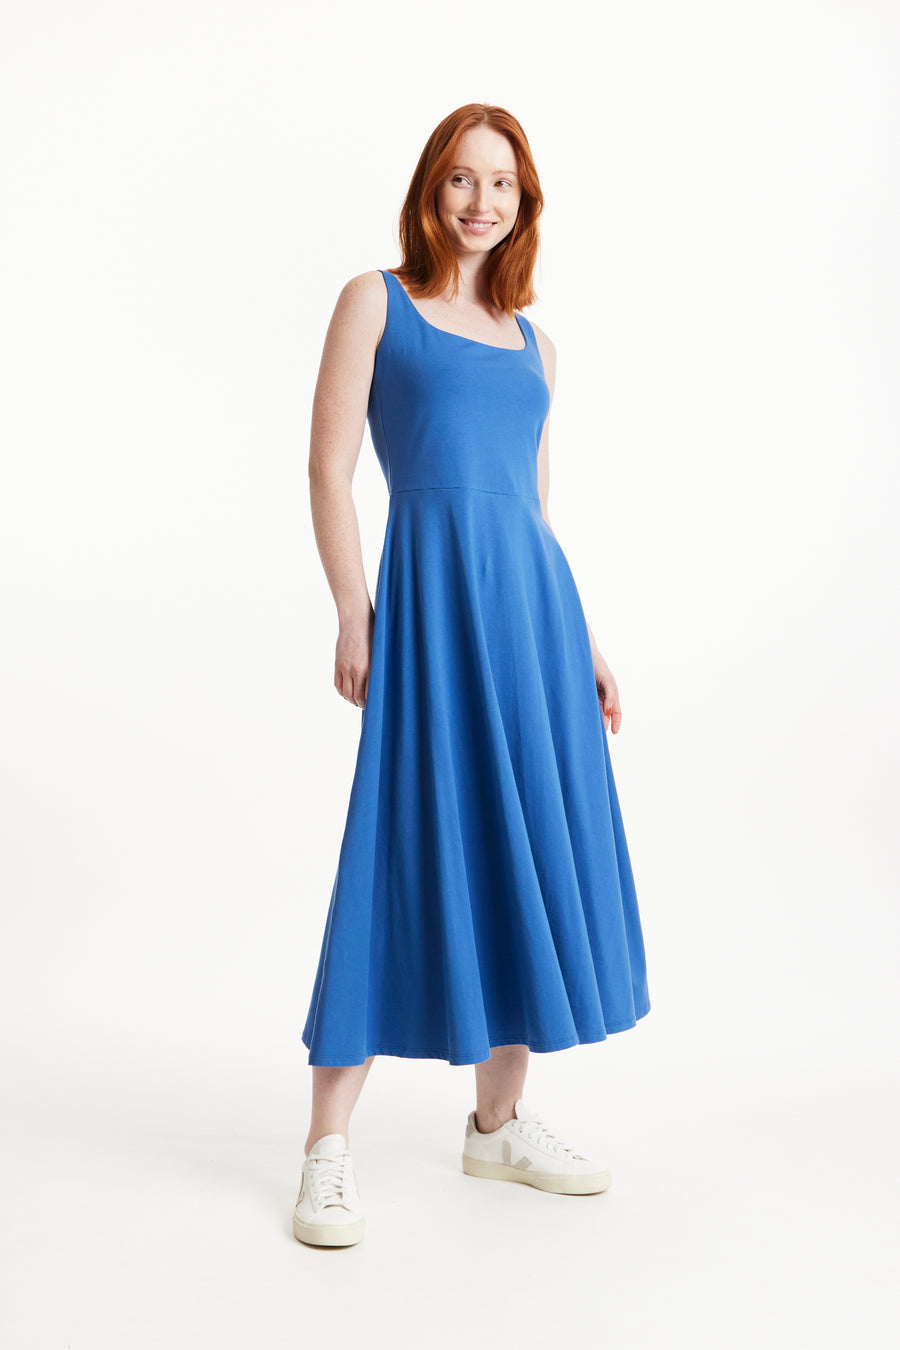 People Tree Fair Trade, Ethical & Sustainable Tyra Dress in Blue 95% organic certified cotton, 5% elastane